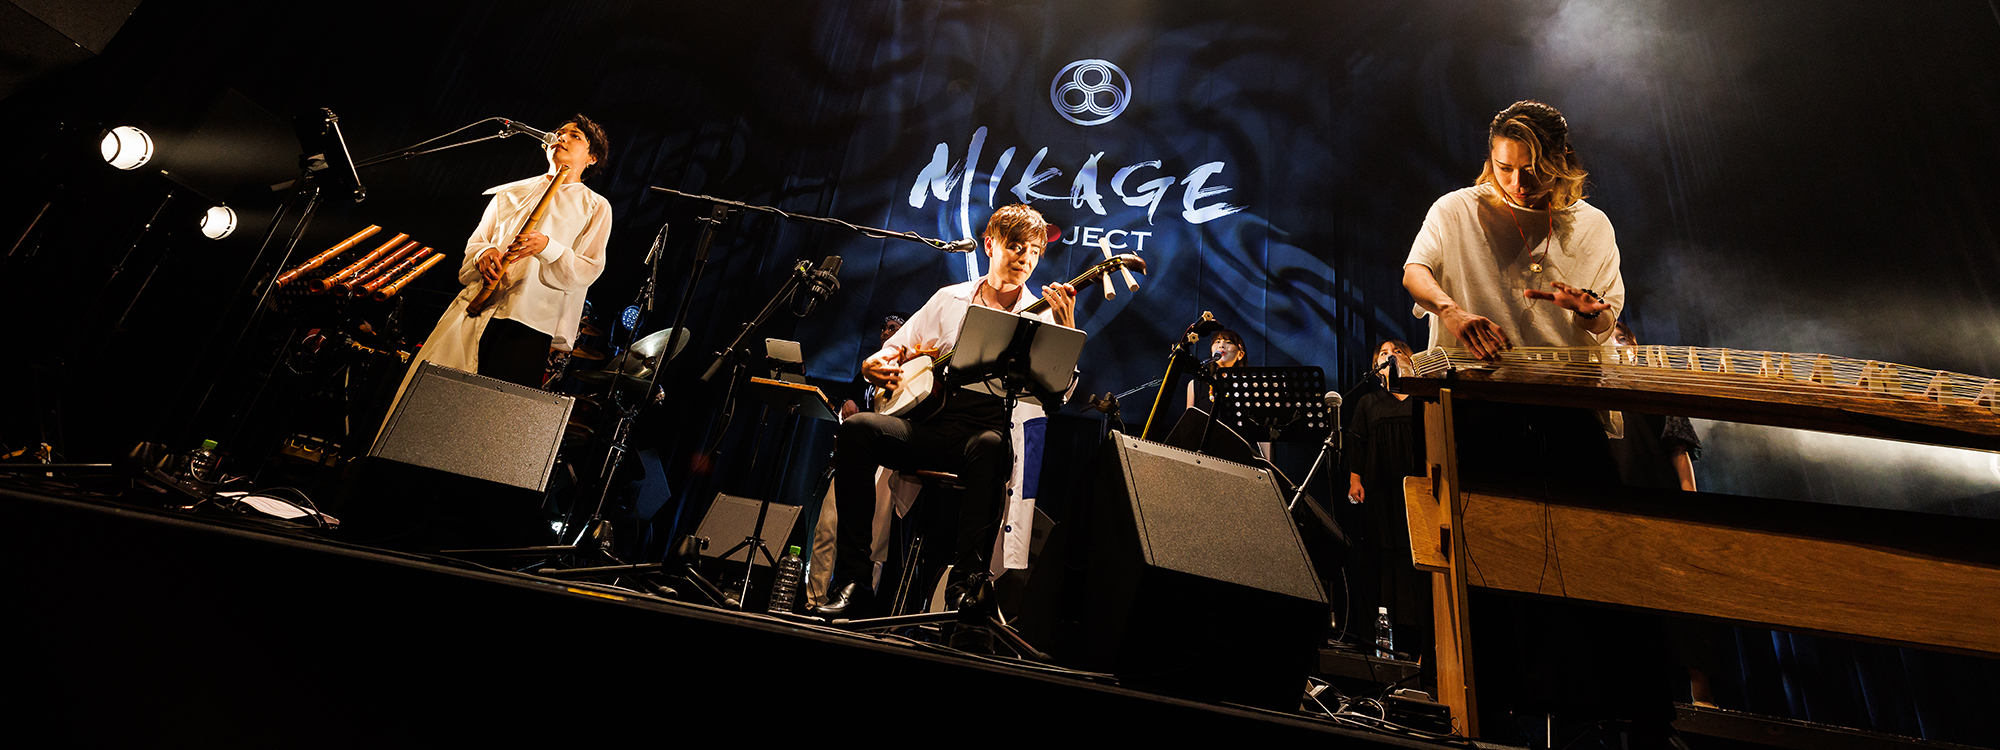 MIKAGE PROJECT World Tour: New Journey